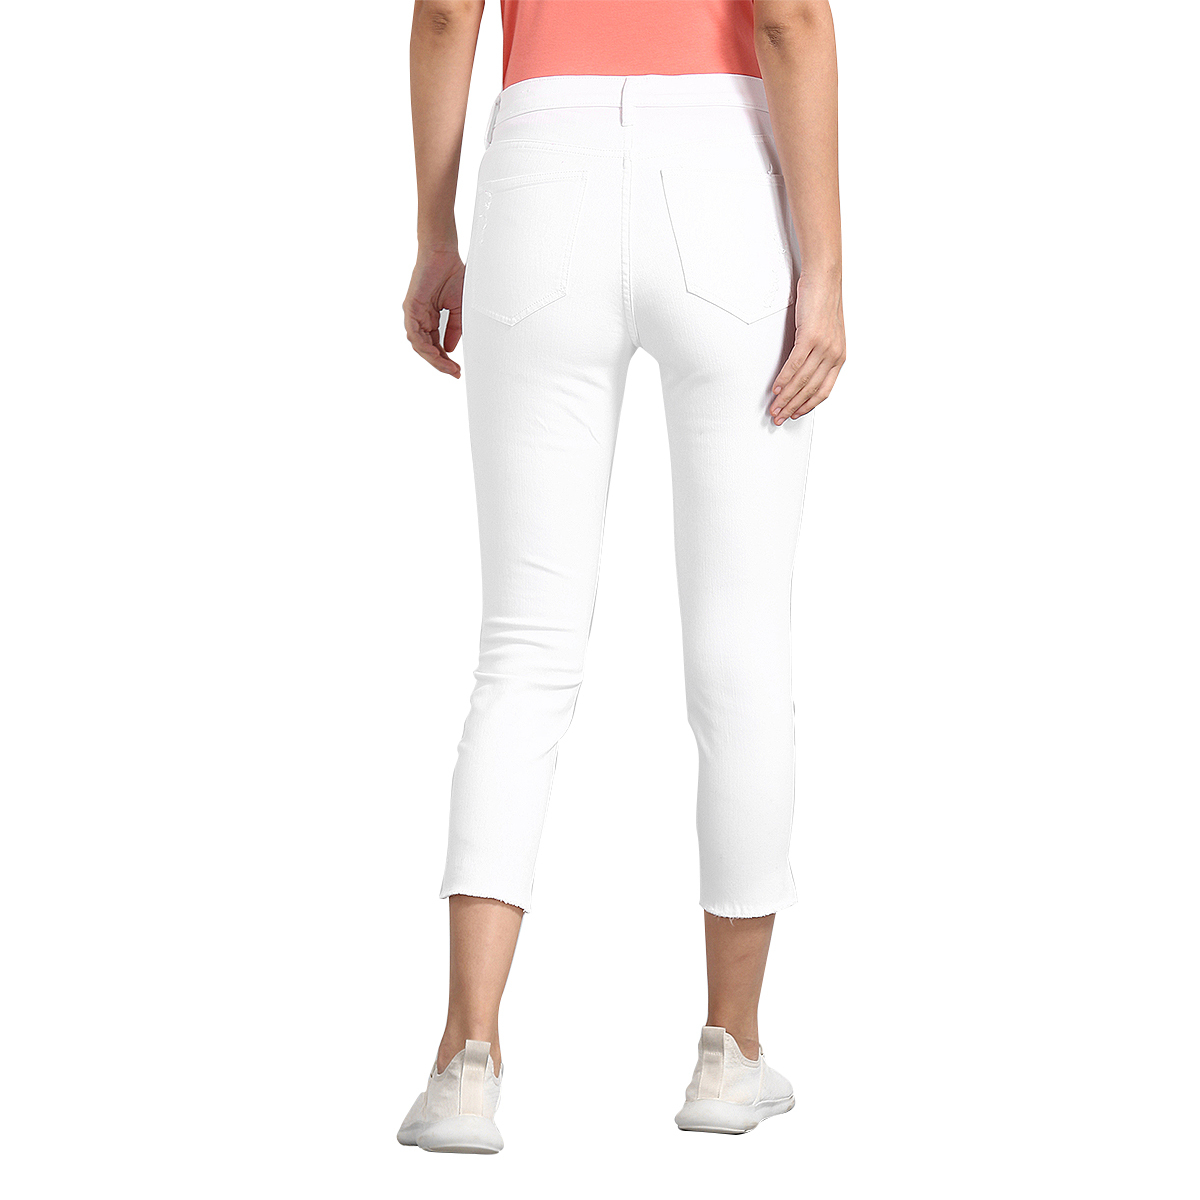 Gap High Rise Skinny Fit Sold Color Jeans Styled with Heavy Distress & Raw Hems - White